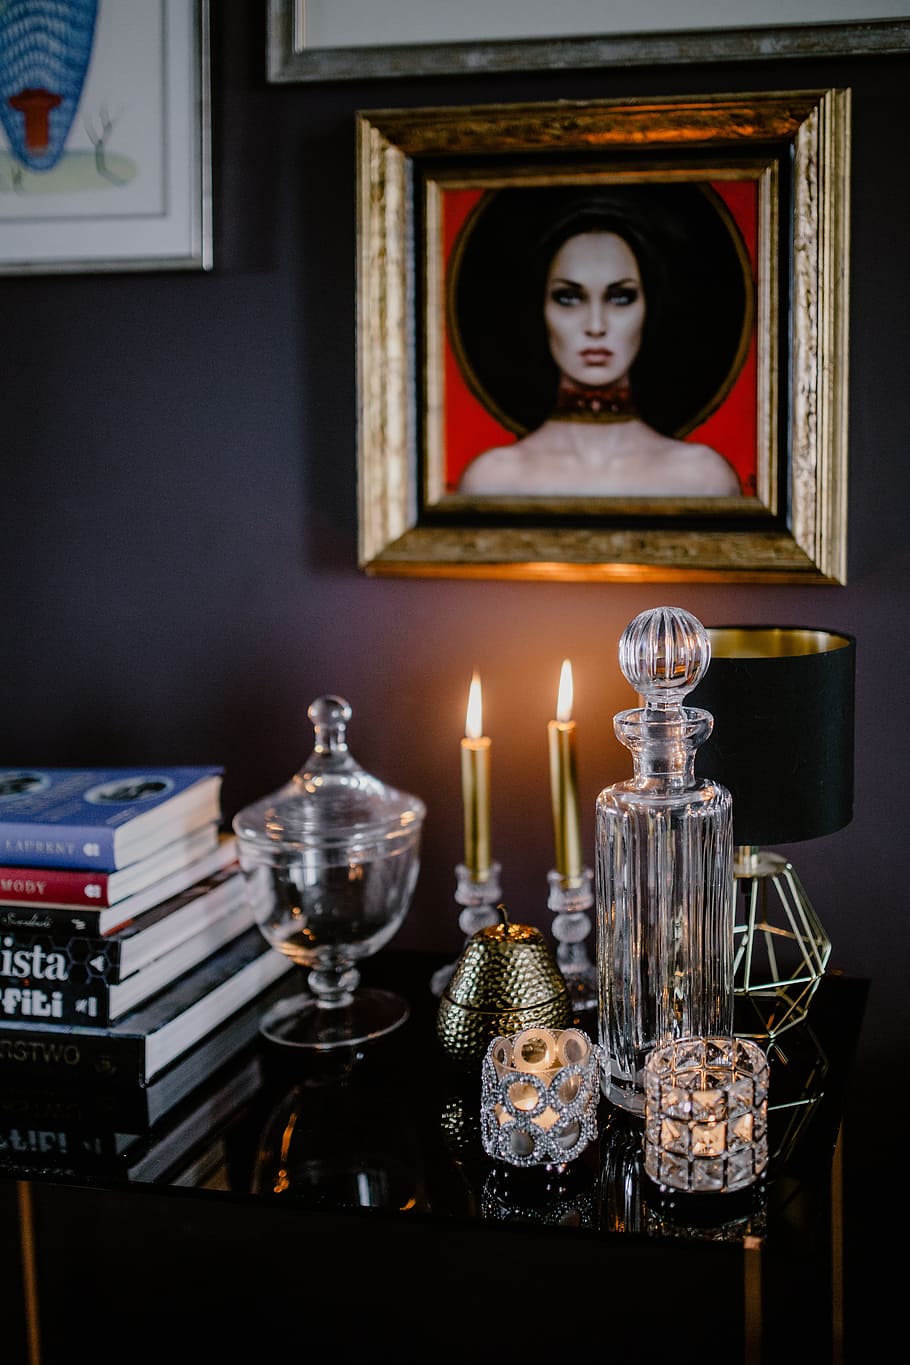 decanter, candles, painting, wall, interior, home, magazines, essentials, books, decor